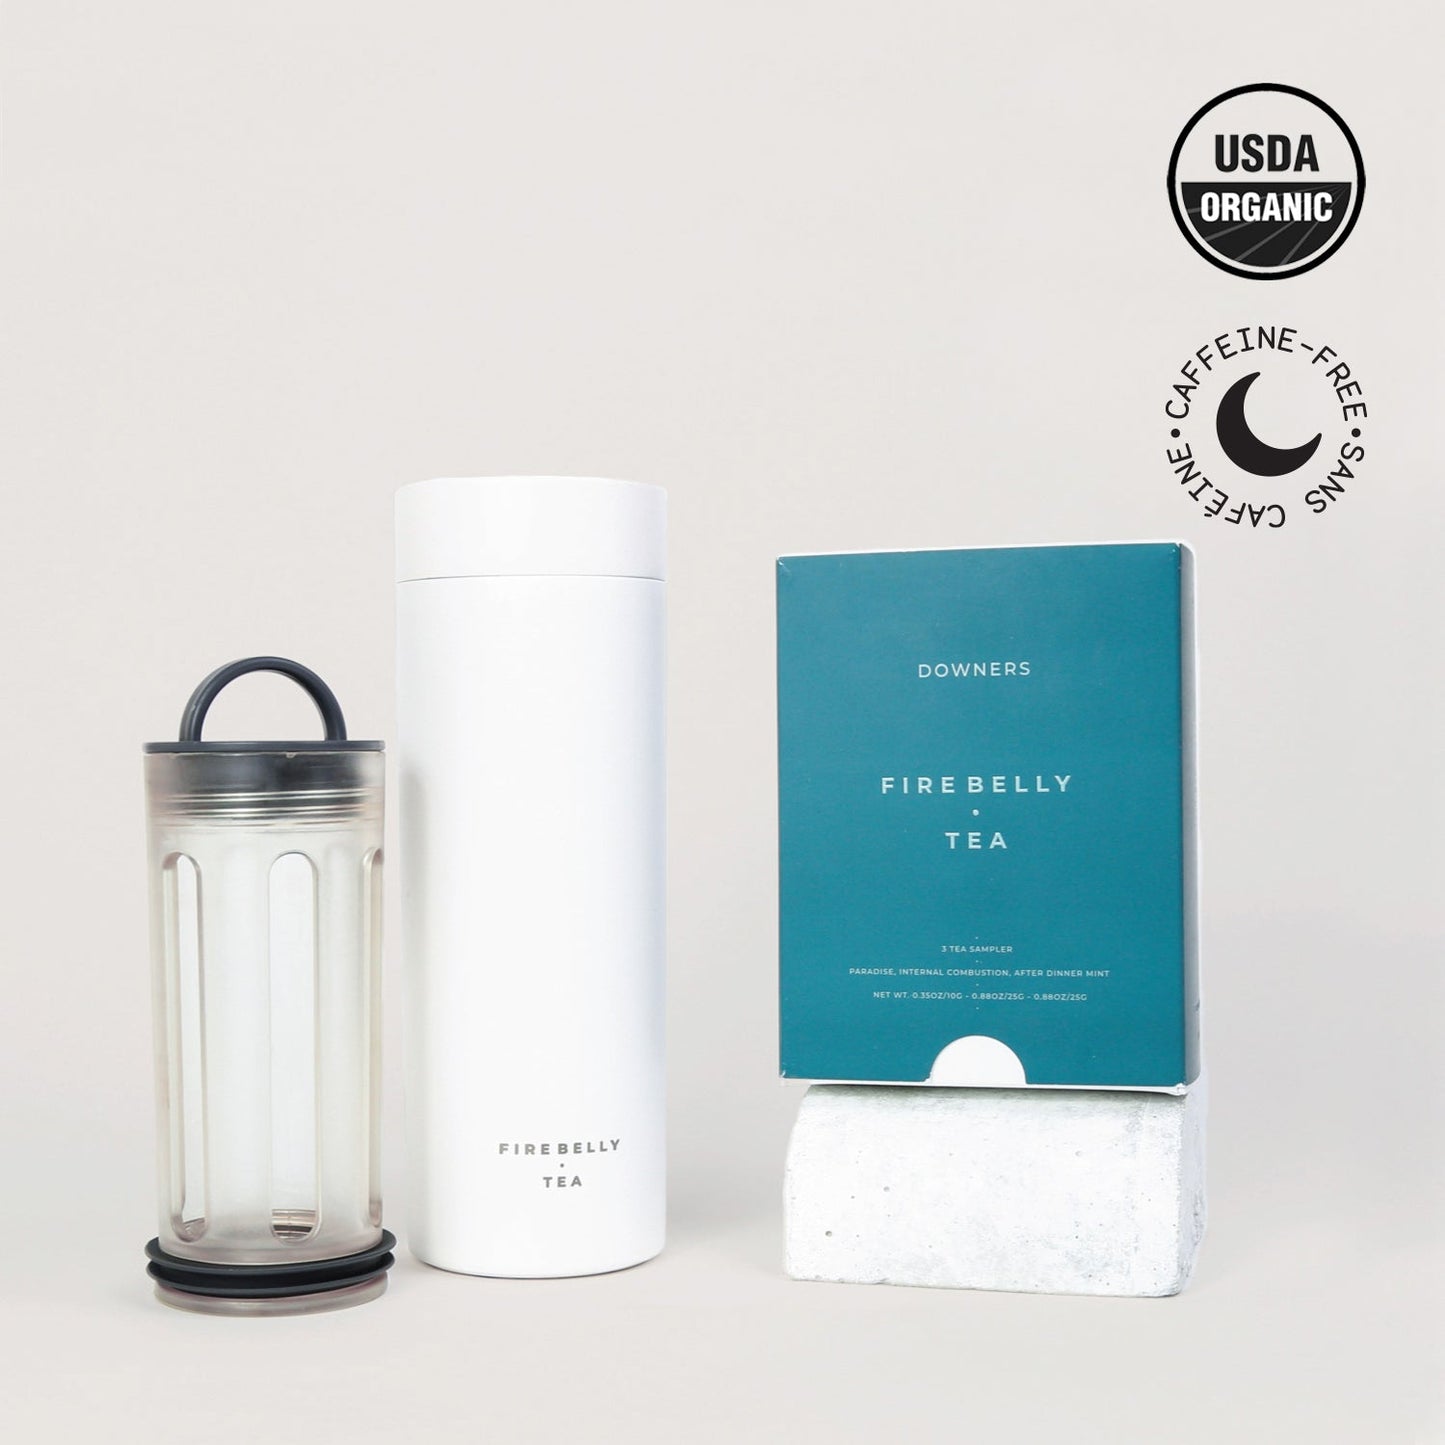 Movers & Shakers by Firebelly Tea